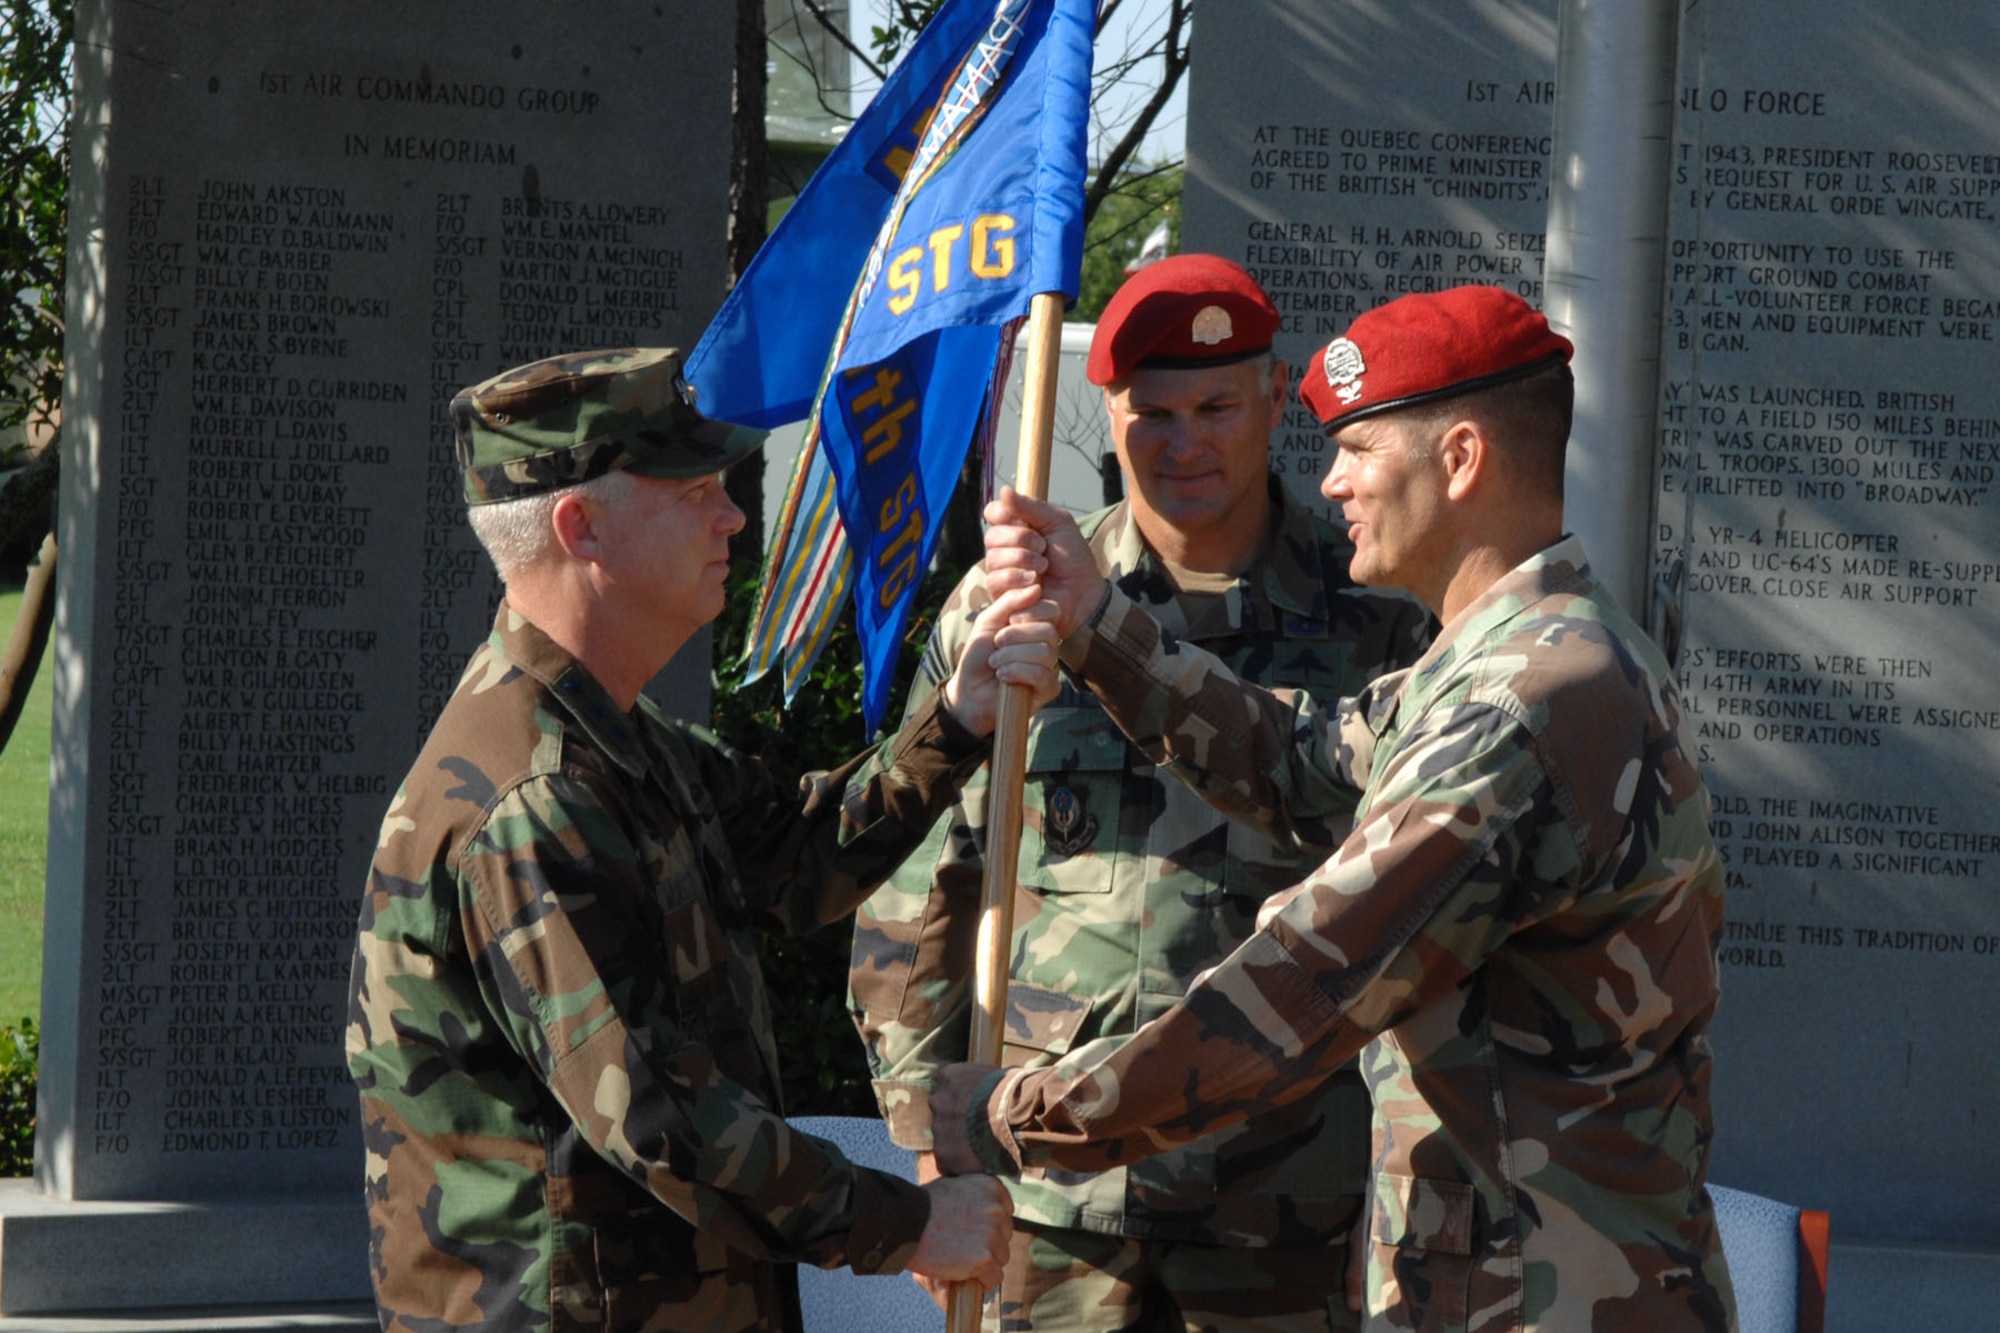 Col. Brad Thompson (right), new 720th Special Tactics Group commander, accepts the unit's flag from Lt. Gen. Donny Wurster (left), Air Force Special Operations Command commander, during the 720th STG change of command ceremony July 1 at Hurlburt Field. Col. Marc Stratton relinquished command of the Air Force's only special tactics squadron and leaves Hurlburt Field to become commander, U.S. Military Group, Chile, at the U.S. embassy in Santiago. (U.S. Air Force photo/Senior Airman Stephanie Jacobs)